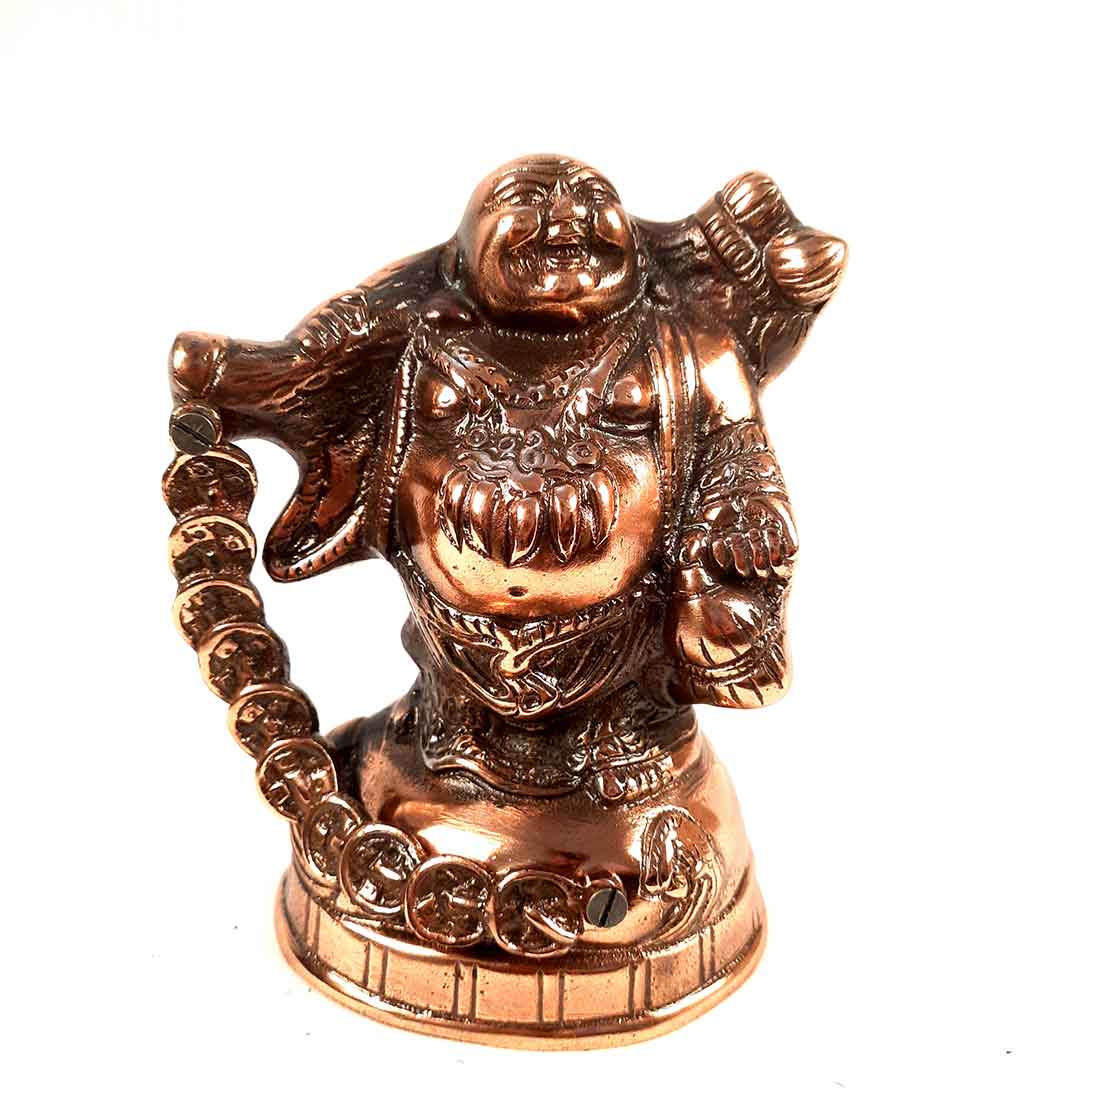 Lughing Buddha for Luck | Happy Man for Fortune & Prosperity - 8 Inch - ApkaMart